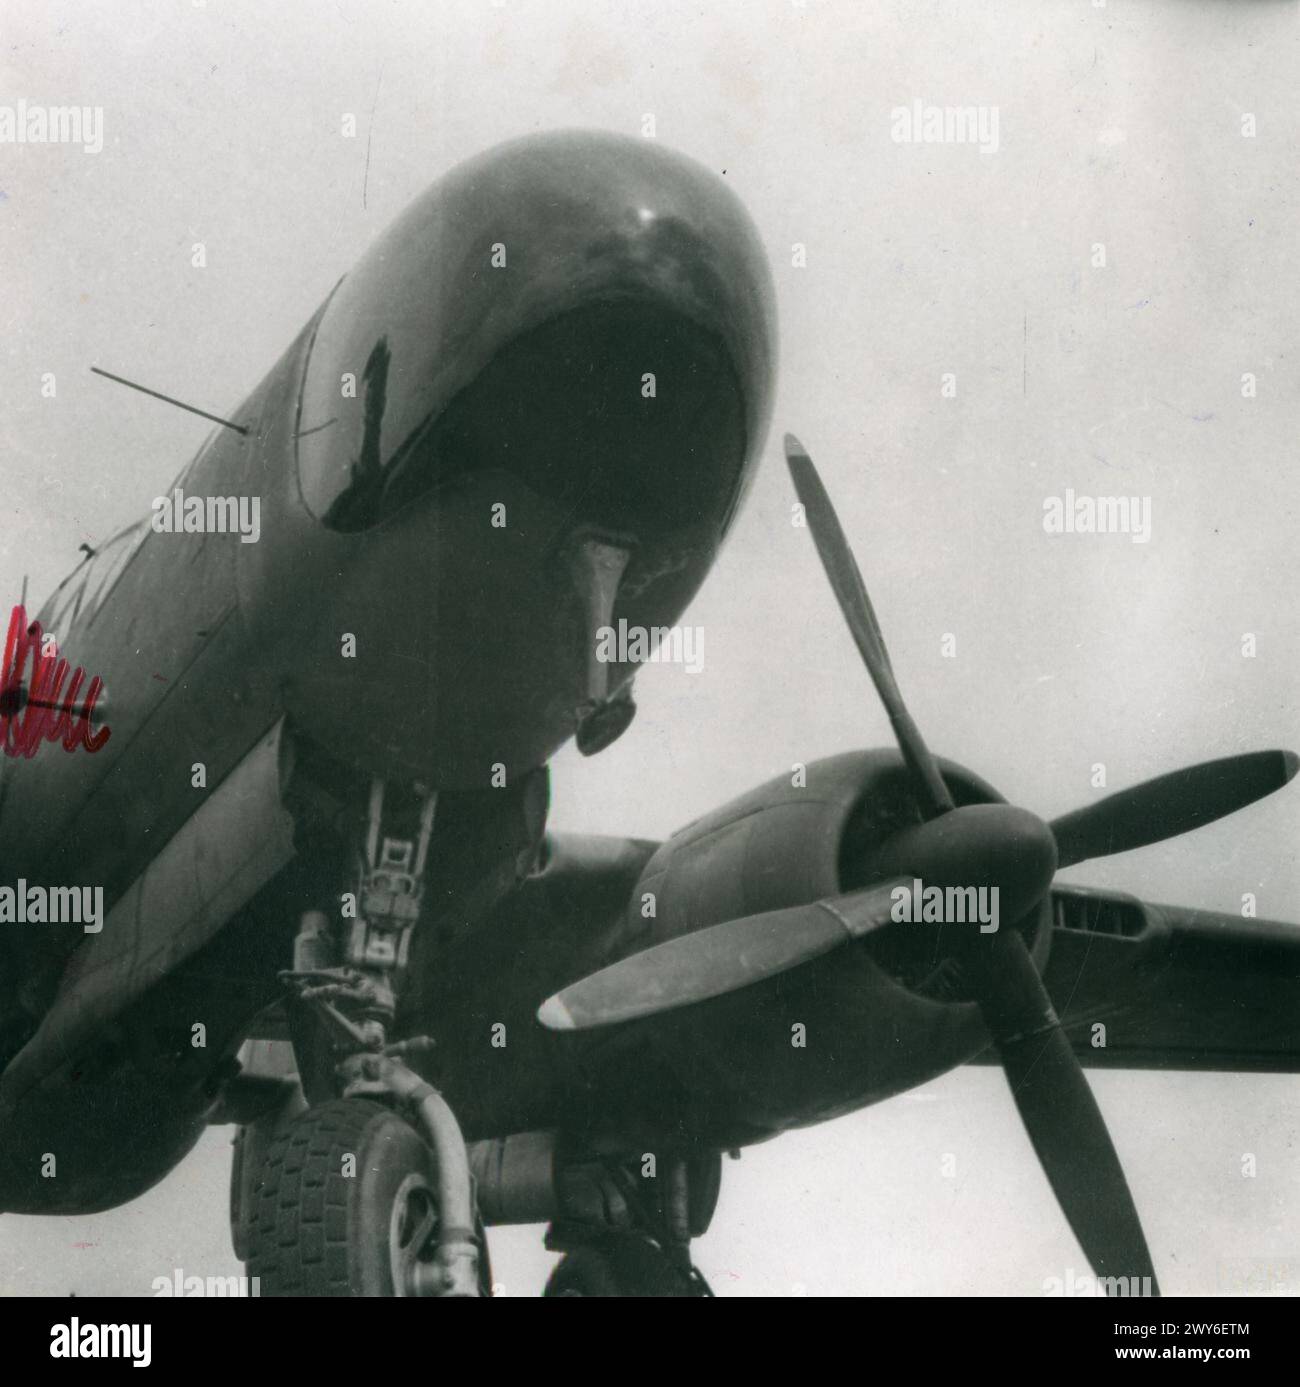 UNITED STATES ARMY AIR FORCES (USAAF) IN BRITAIN, 1942-1945 - The nose of a P-61 Black Widow of the 422nd Night Fighter Squadron.Image stamped on reverse: 'Keystone Press.'[stamp], 'Not to be published 24 Jul 1944.' [stamp], 'Passed for publication 22 Aug 1944.' [stamp] and '342456.' [Censor no]Printed caption on reverse: 'Newest Night Fighter Is Called The 'Black Widow'. The very latest nght fighter, the P-61, known as the 'Black Widow', has commenced operations. This powerful plane is driven by two 2,000 h.p. Pratt and Whitney motors and is armed with cannons. It looks very much like the 'Li Stock Photo